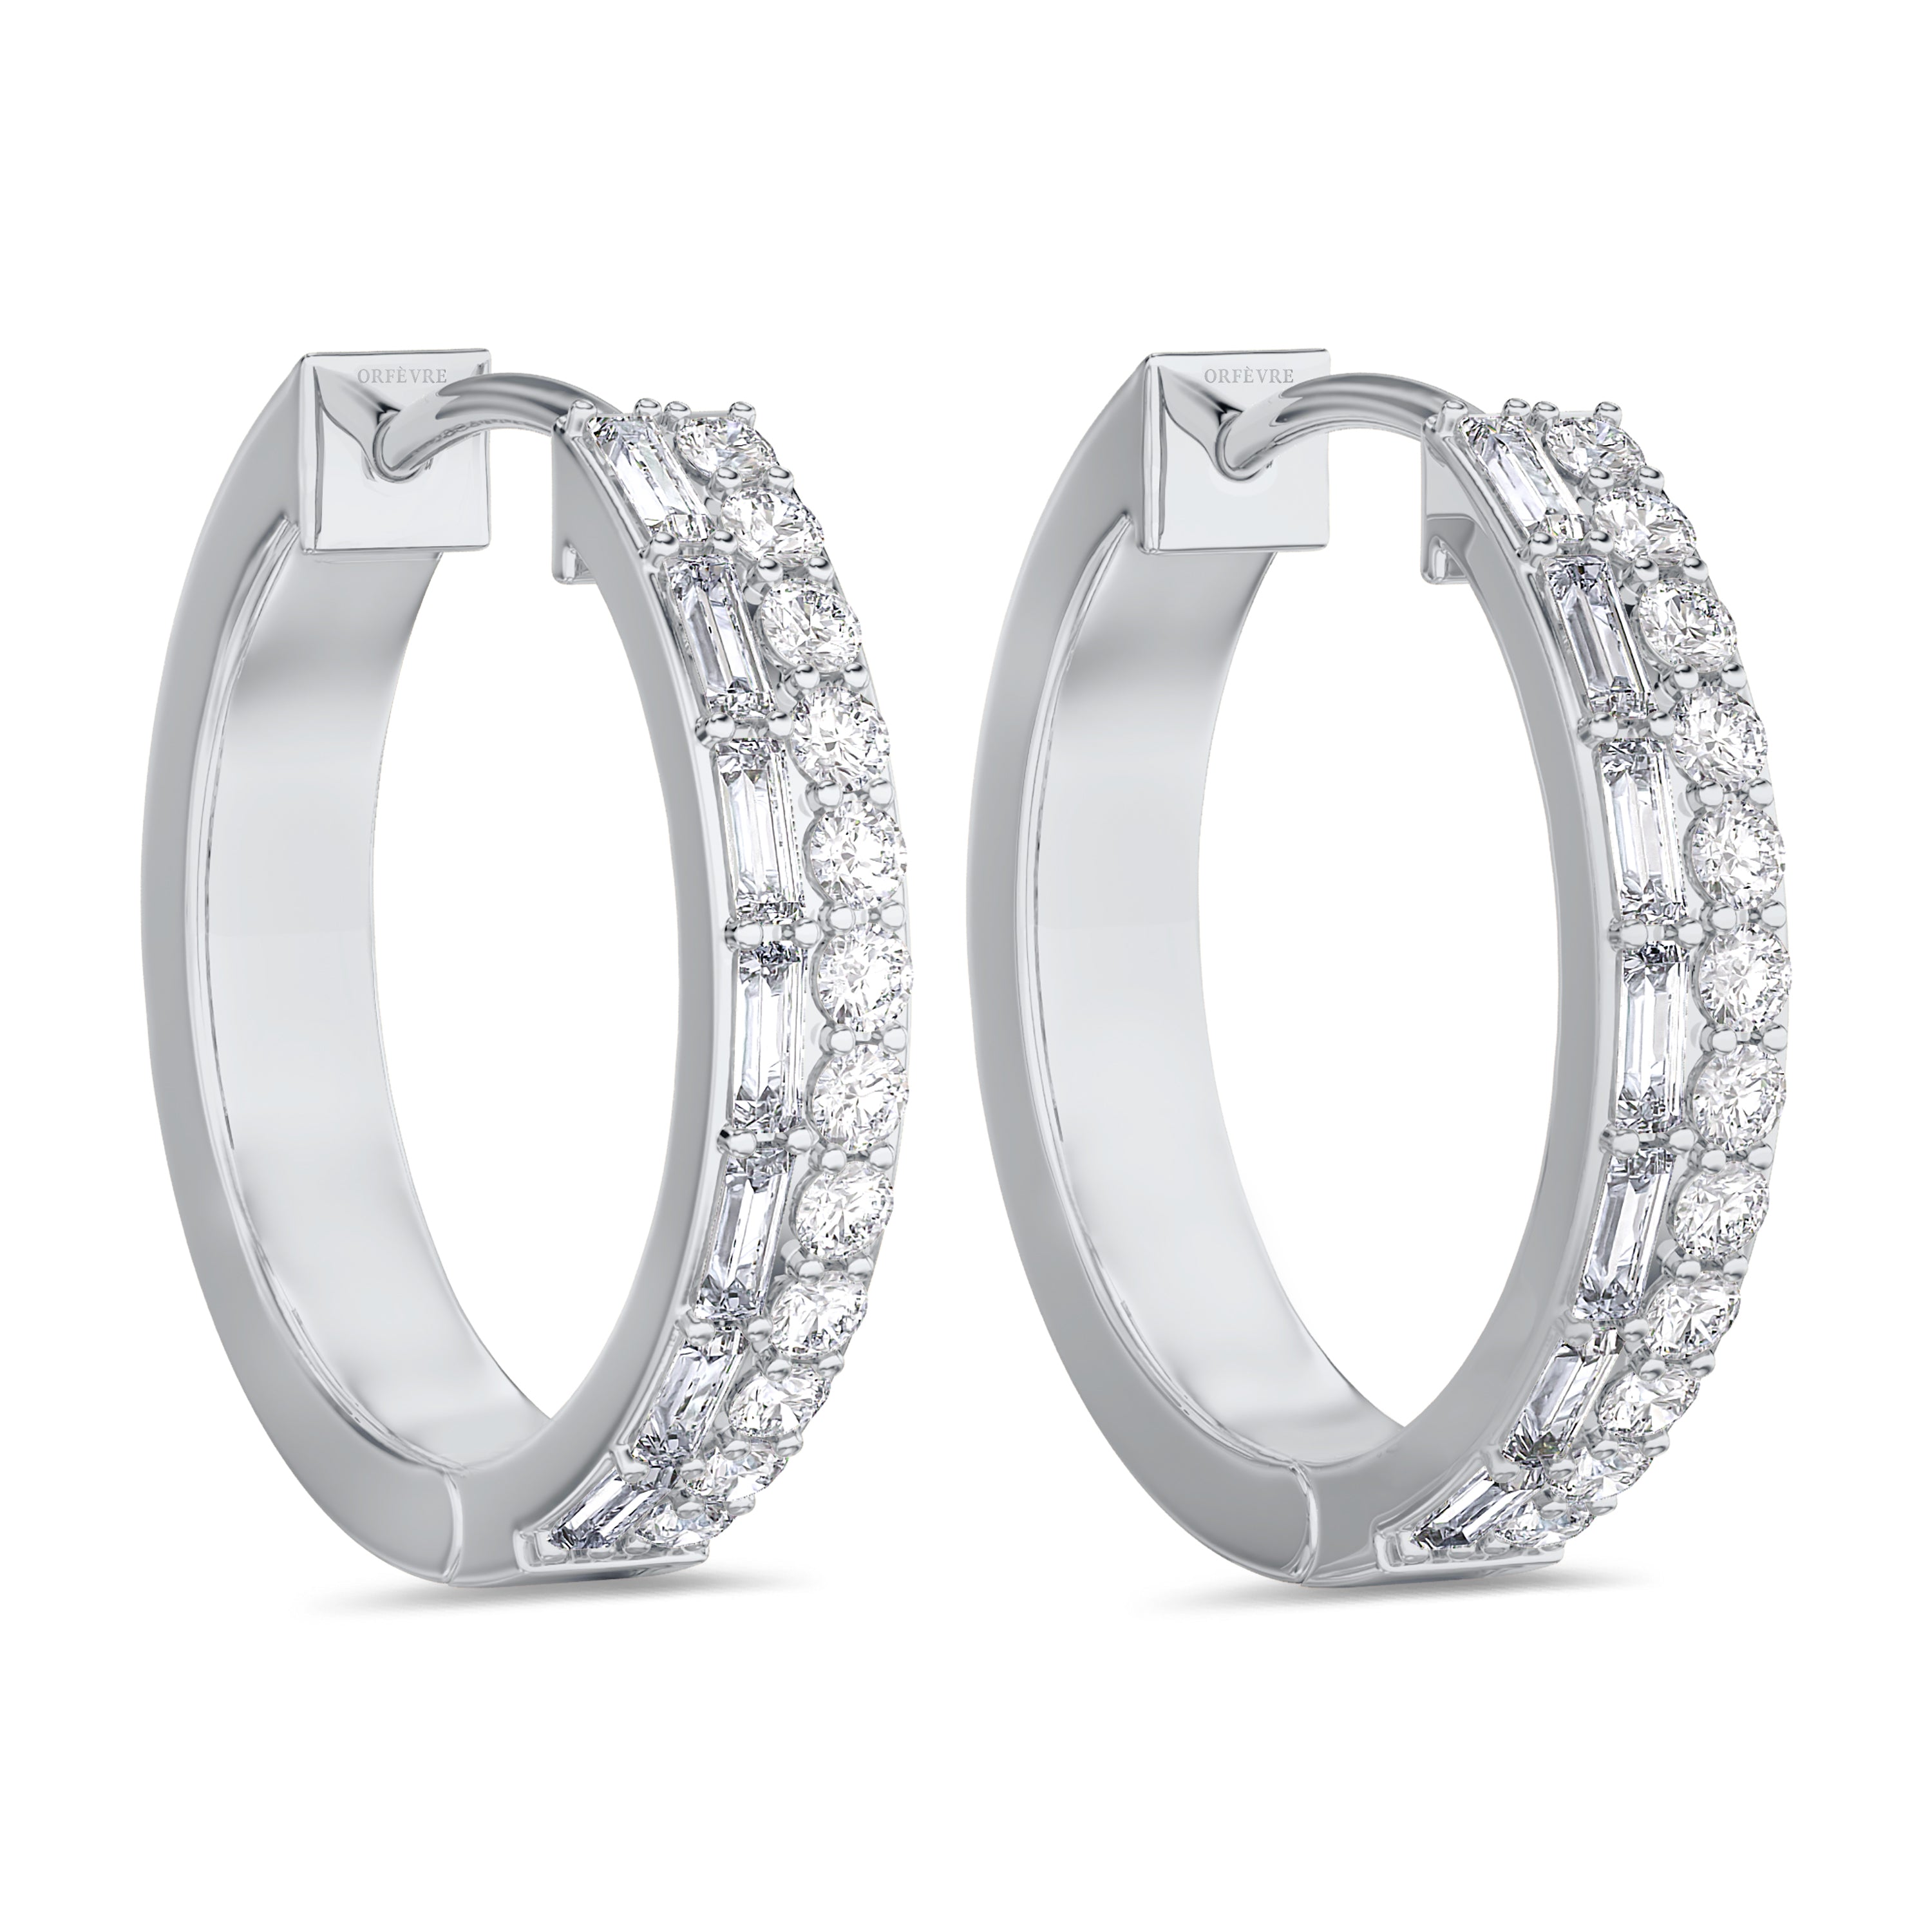 Double row diamond hoop earrings in around 0.94 carat, FG color, SI clarity #gold_white